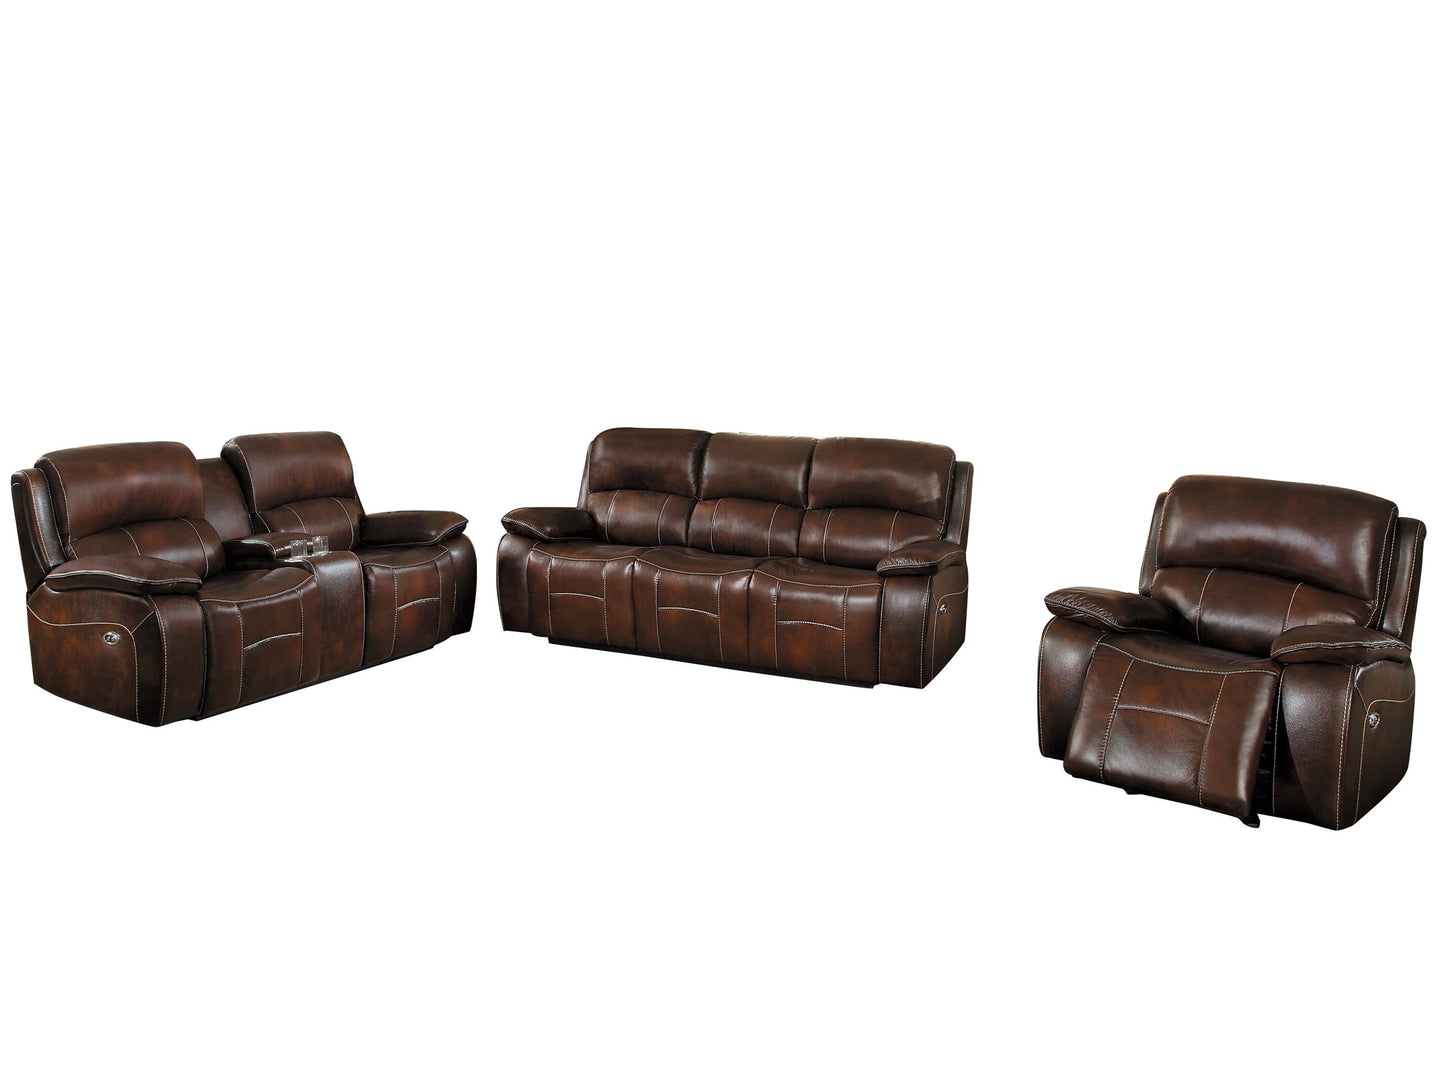 Homelegance Mahala 3PC Power Double Reclining Sofa, Love Seat & Glider Recliner Chair in Brown Top Grain Leather